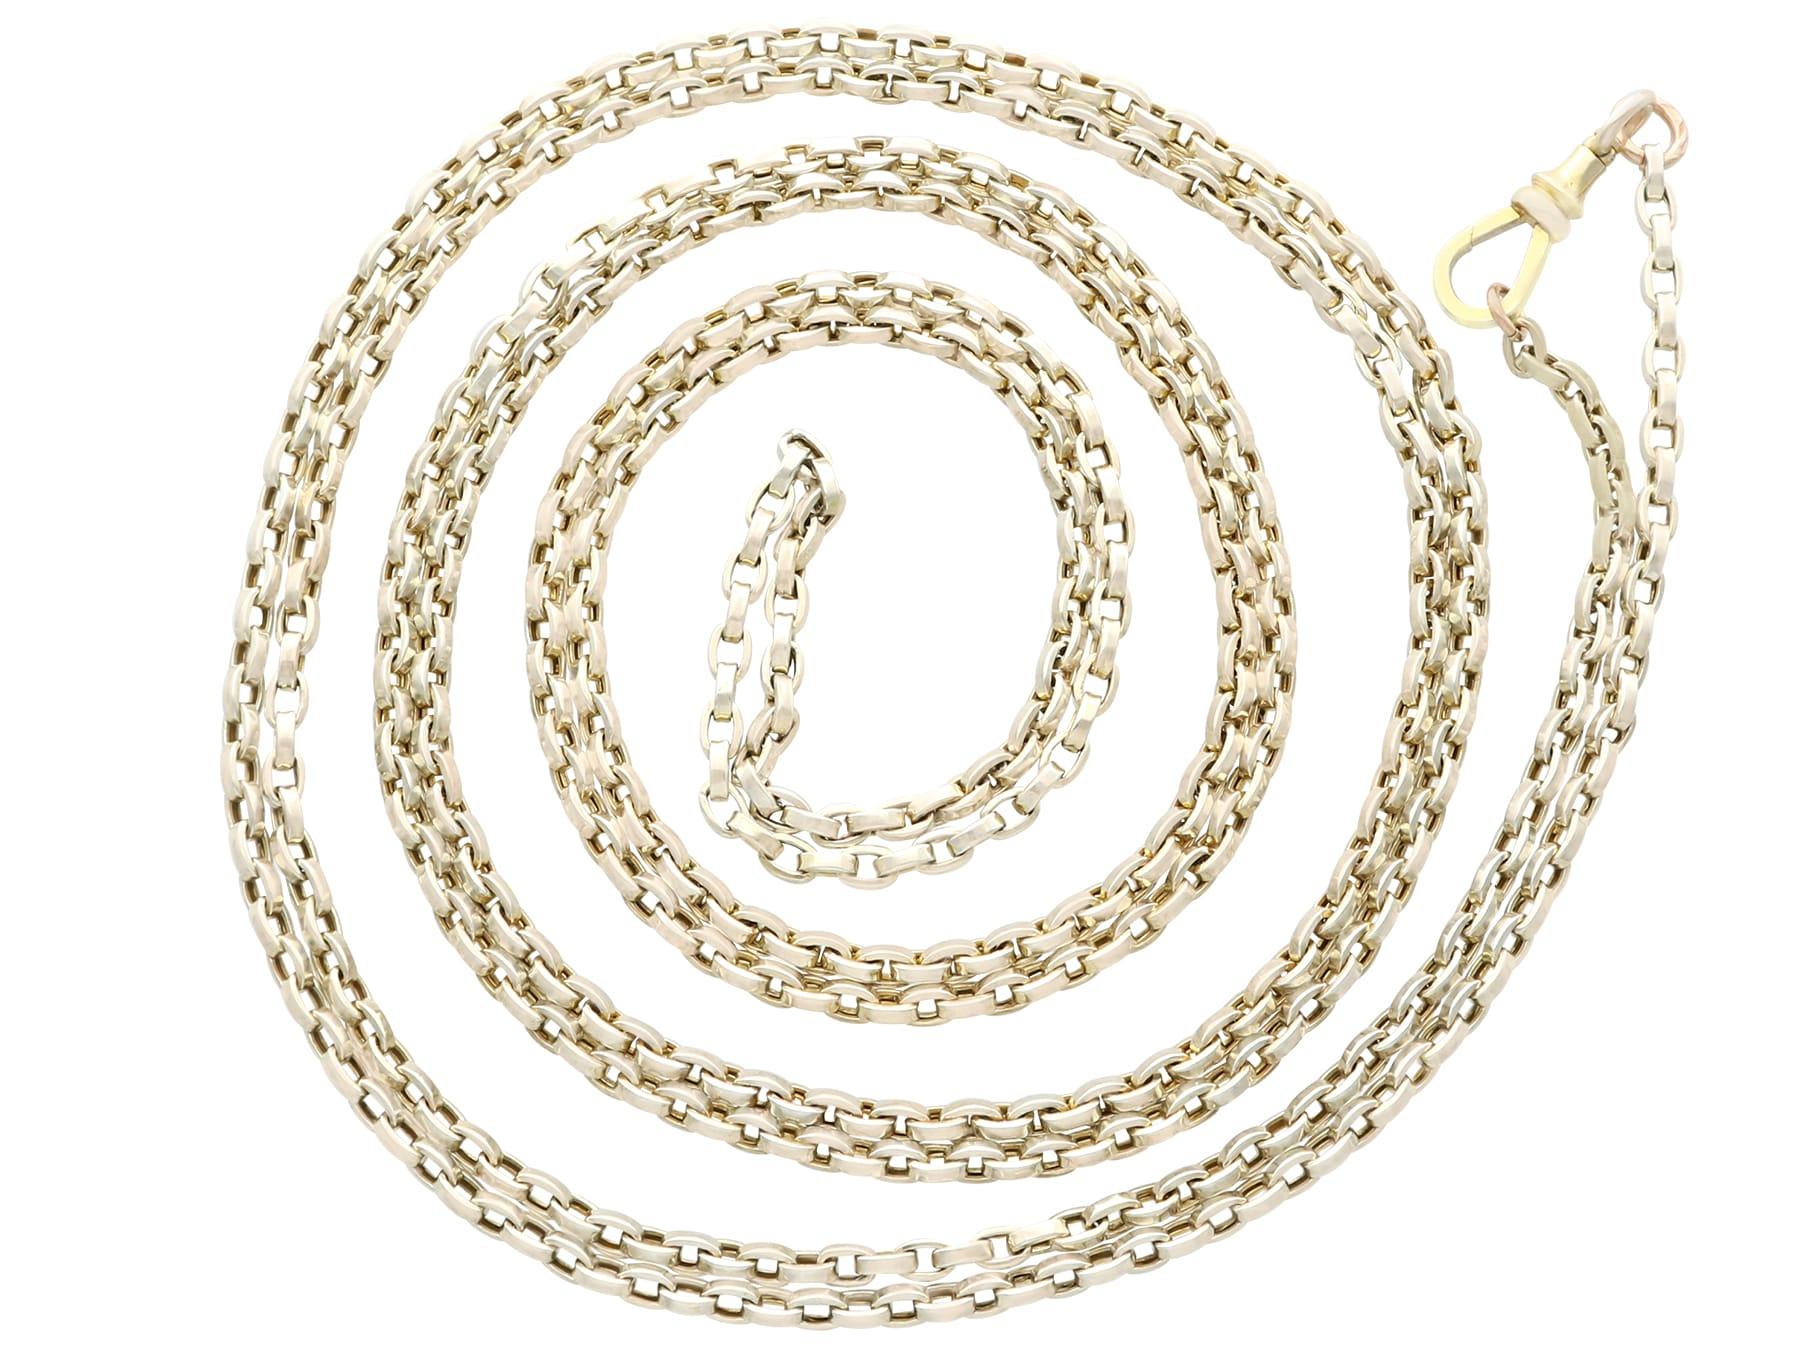 Antique 9k Yellow Gold Longuard Chain Circa 1890 In Excellent Condition For Sale In Jesmond, Newcastle Upon Tyne